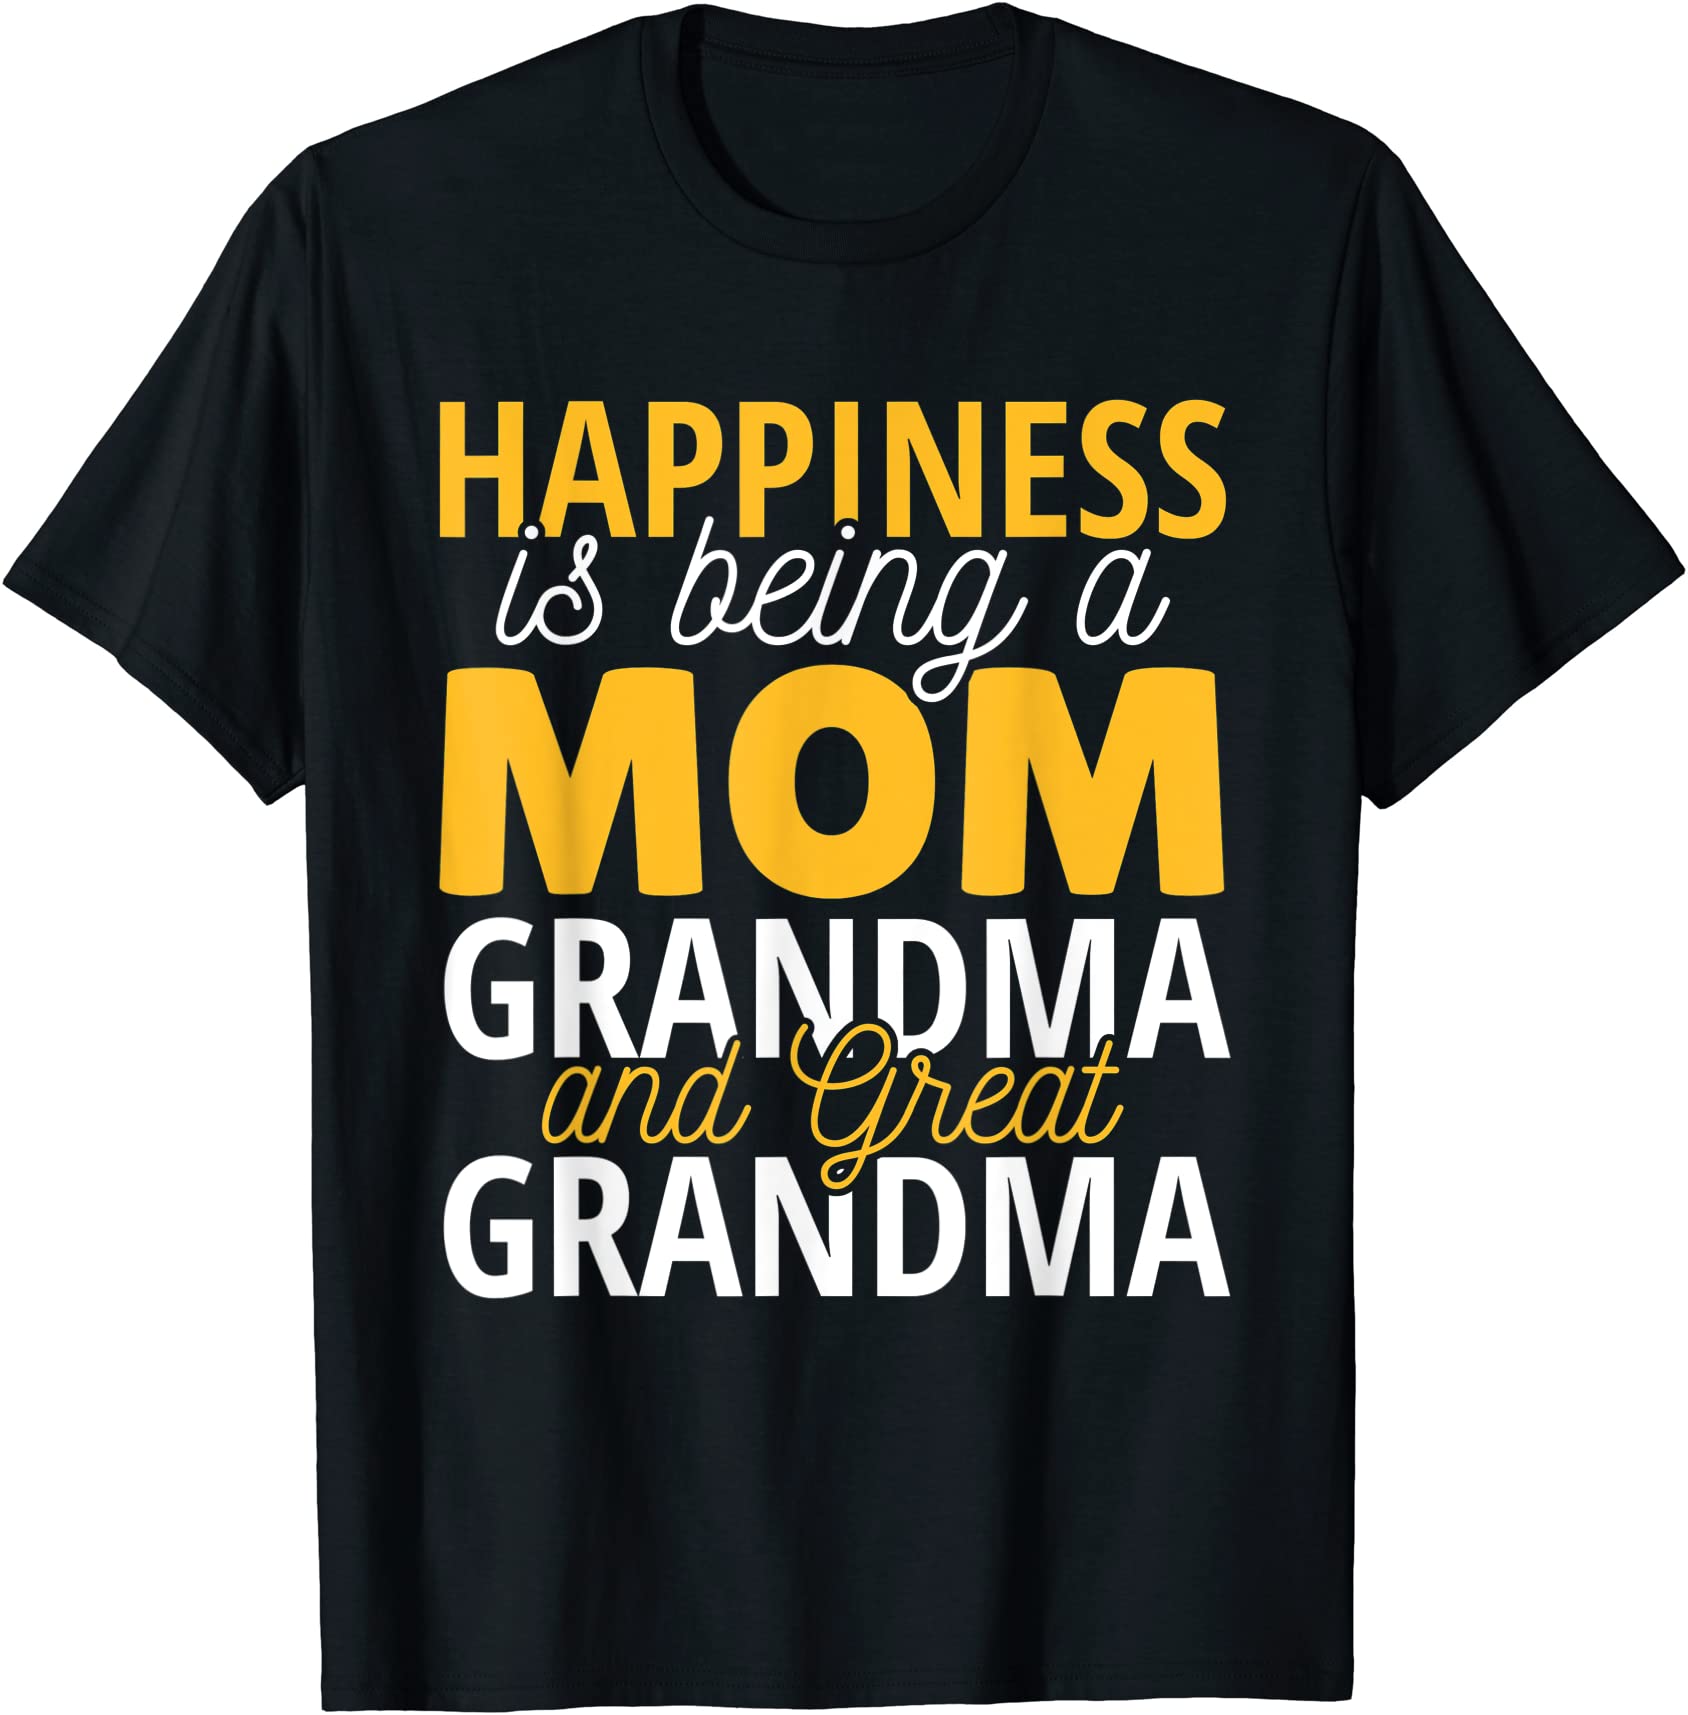 happiness is being a mom grandma and great grandma t shirt men - Buy t ...